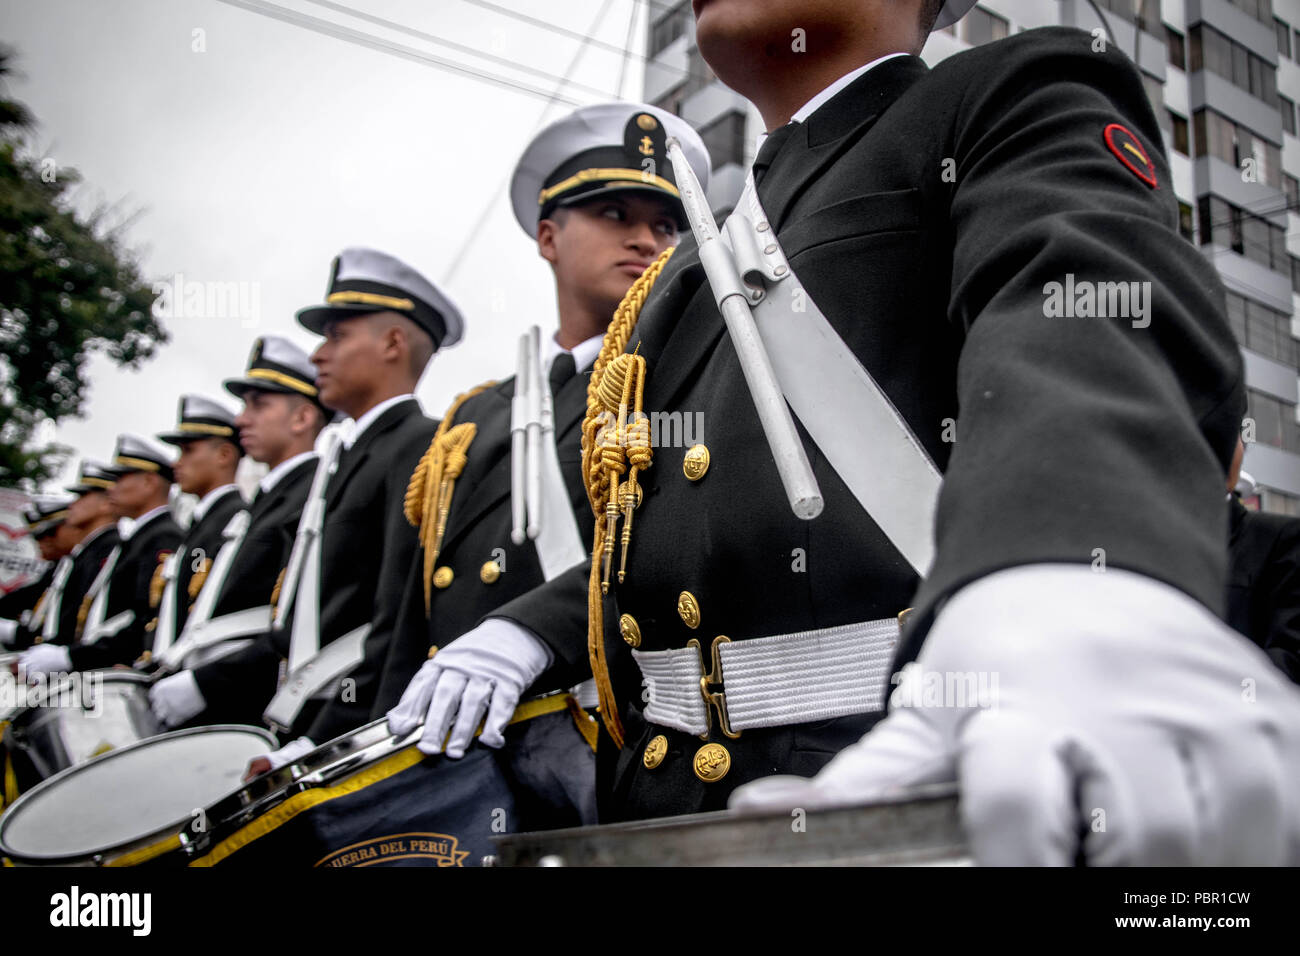 Lima, Lima Region, Peru. 29th July, 2018. Peruvian military personnel seen marching.Members of Peru's armed forces, coastguard, search & rescue, and police march in full uniform during the country's Gran Parada Militar. This parade always occurs the day after Peru's Independence Day marking the official end of festivities across the nation. Credit: Jason Sheil/SOPA Images/ZUMA Wire/Alamy Live News Stock Photo